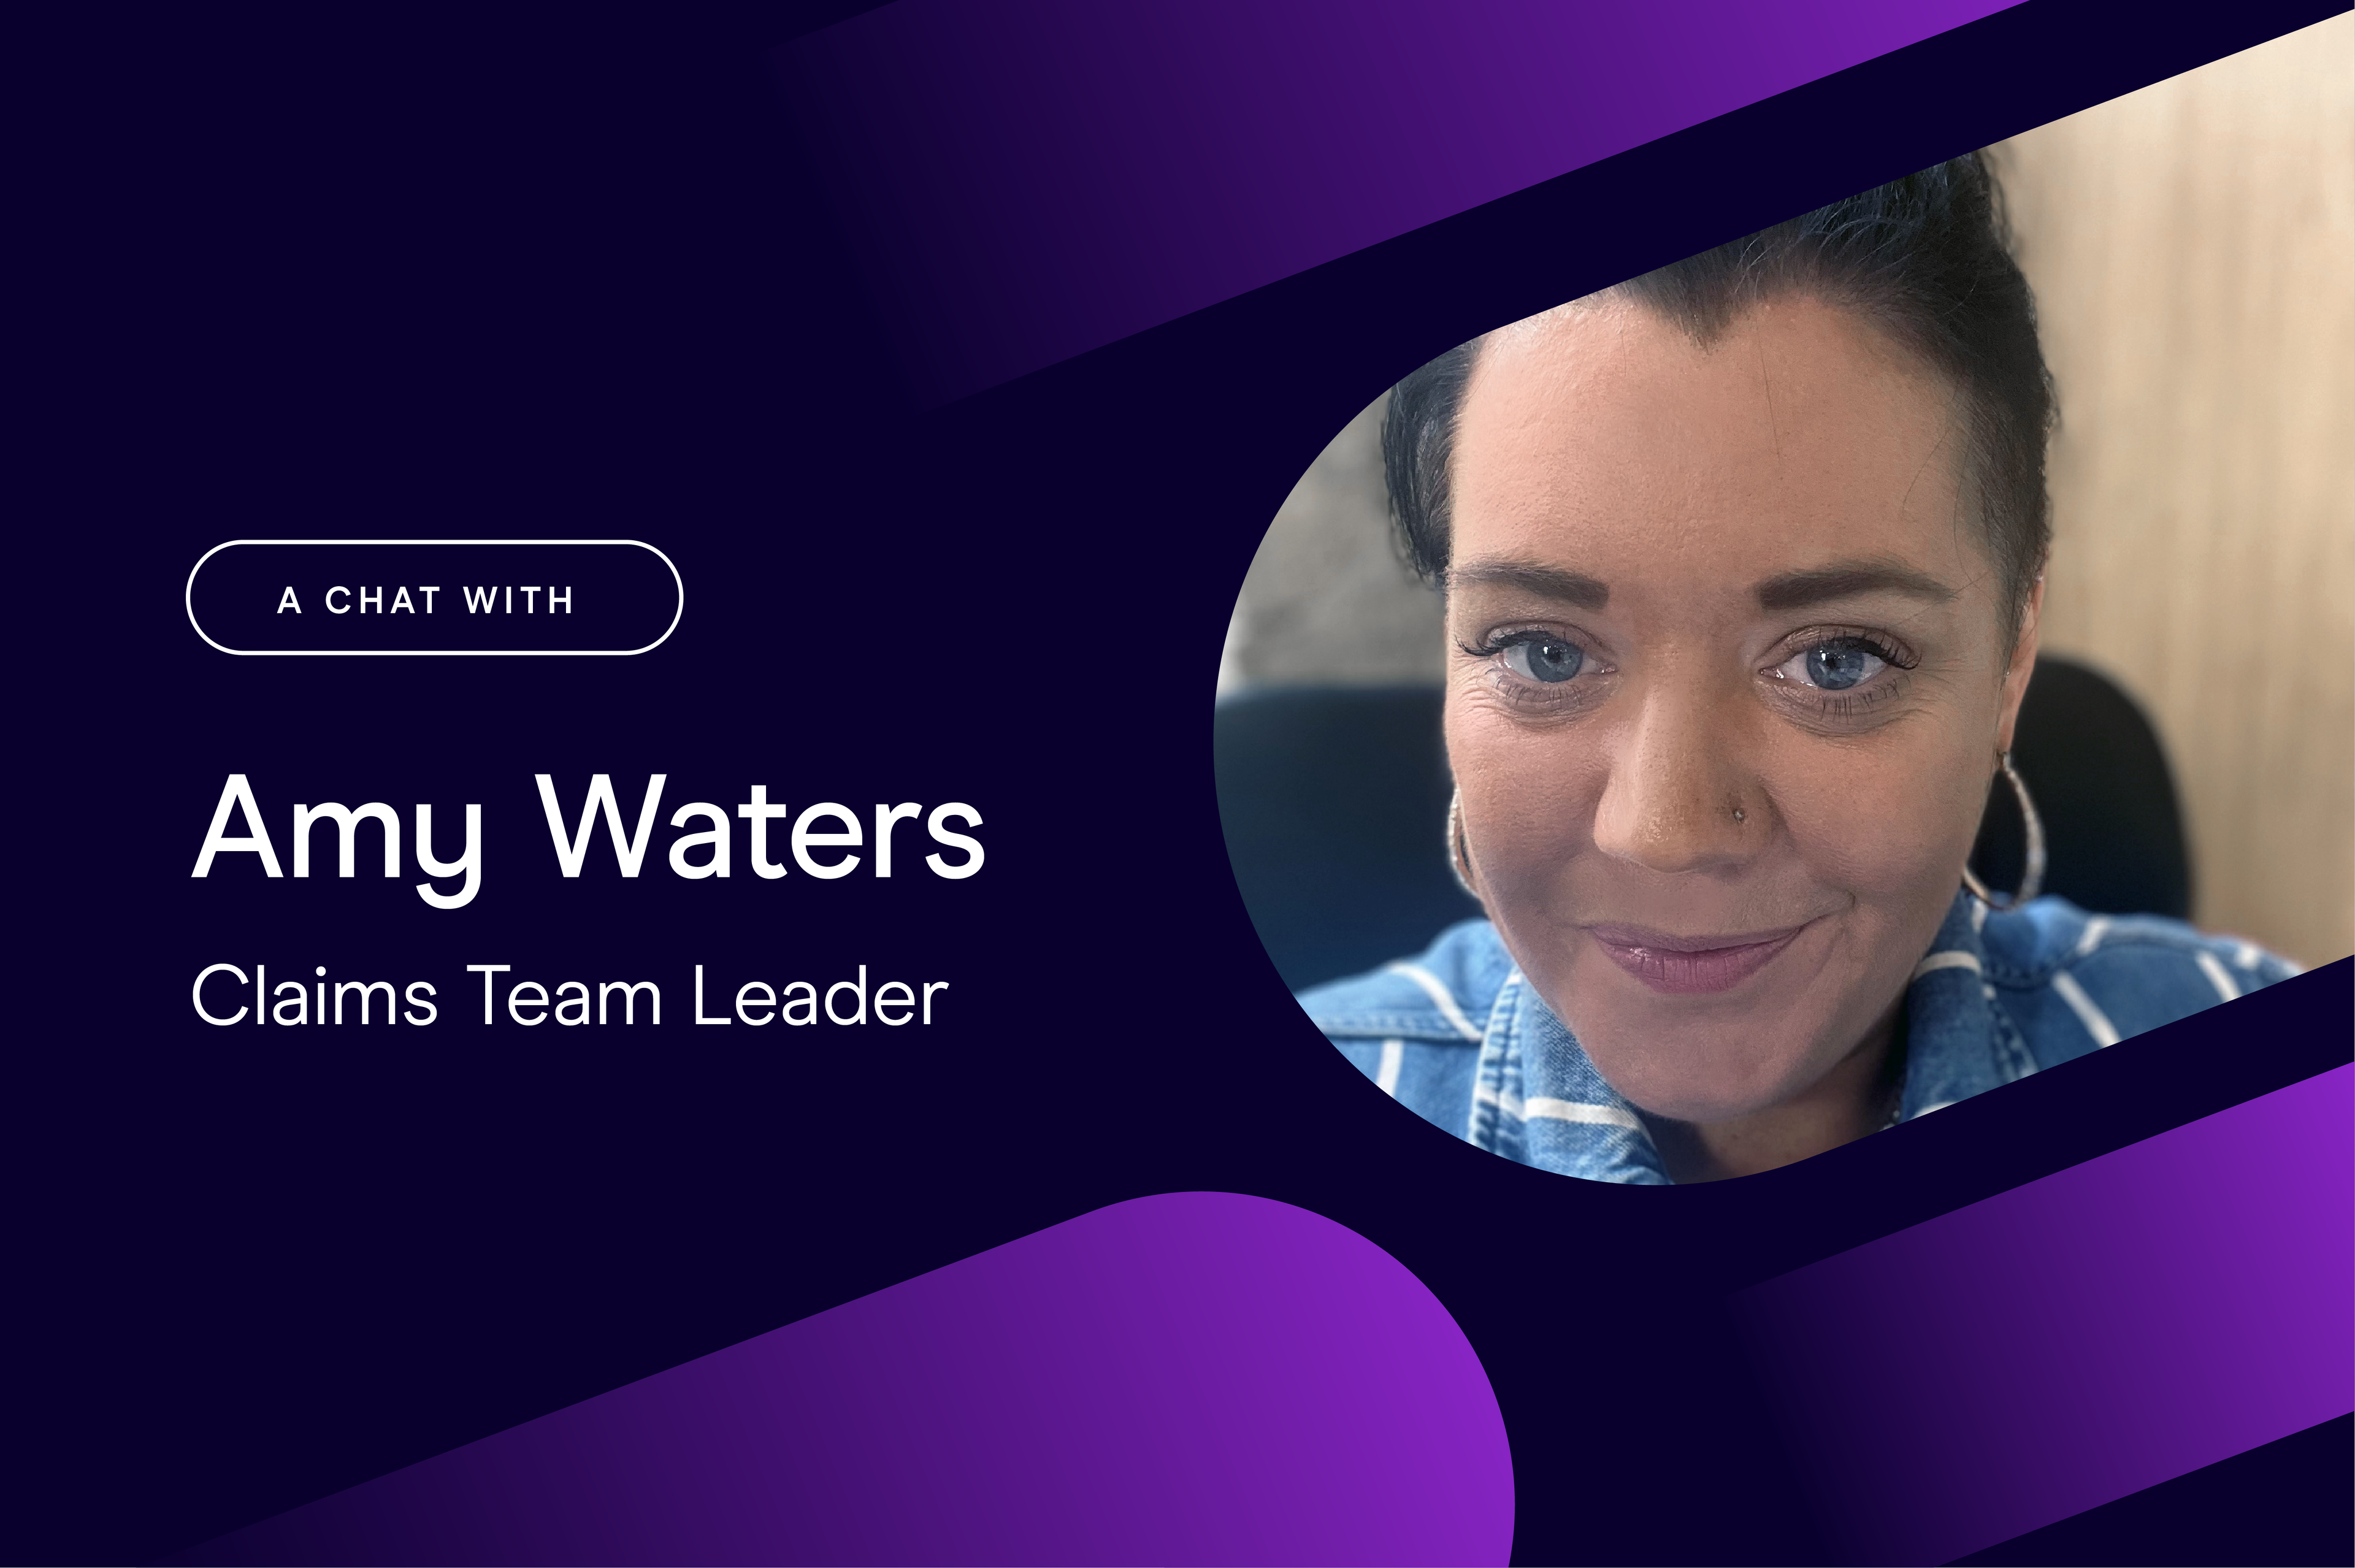 Amy Waters, Claims Team Leader